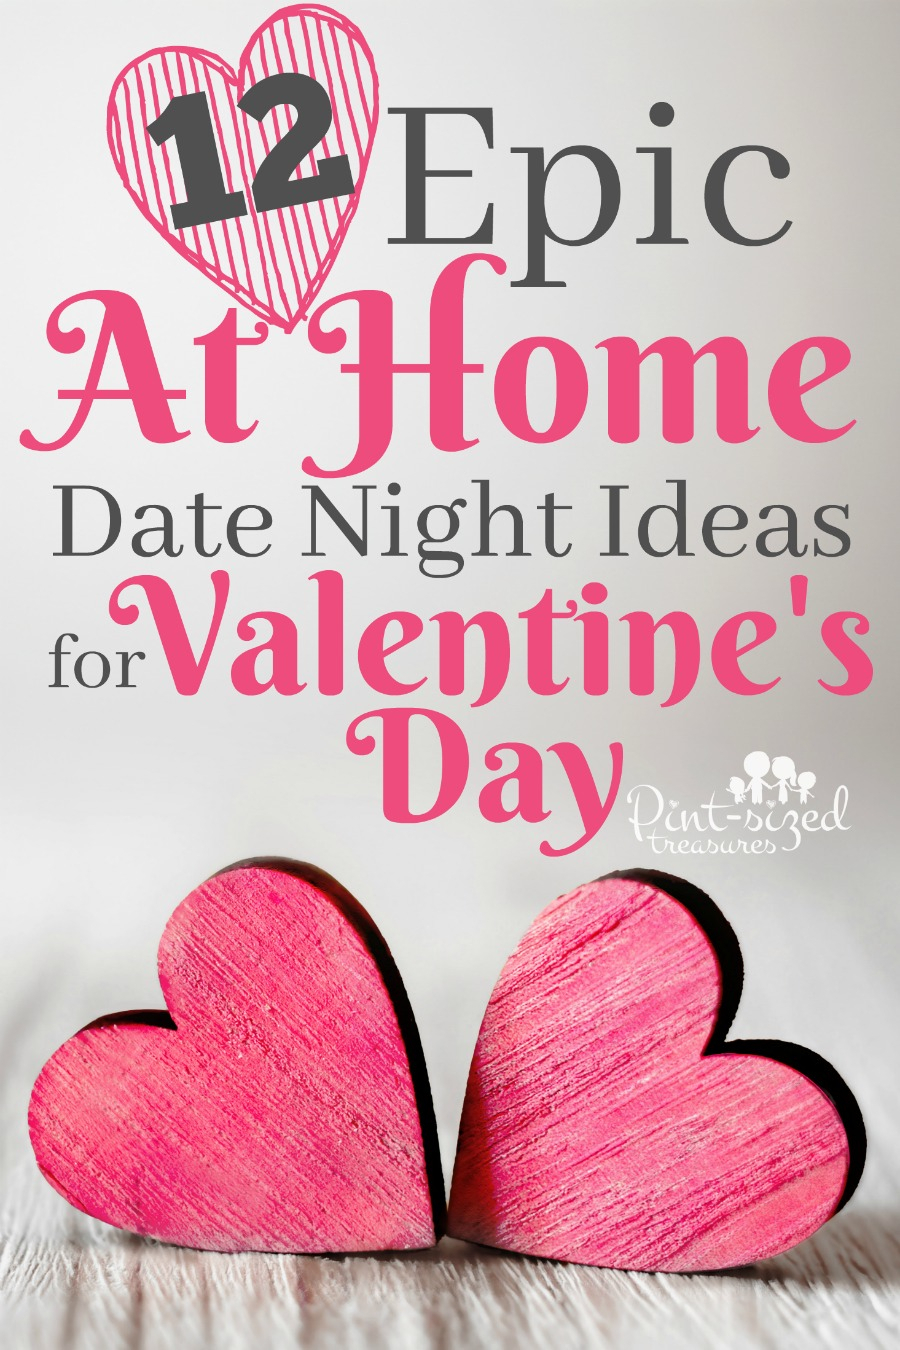 10 Ideal Great Valentines Day Date Ideas 12 epic at home date night ideas for valentines day c2b7 pint sized 8 2024